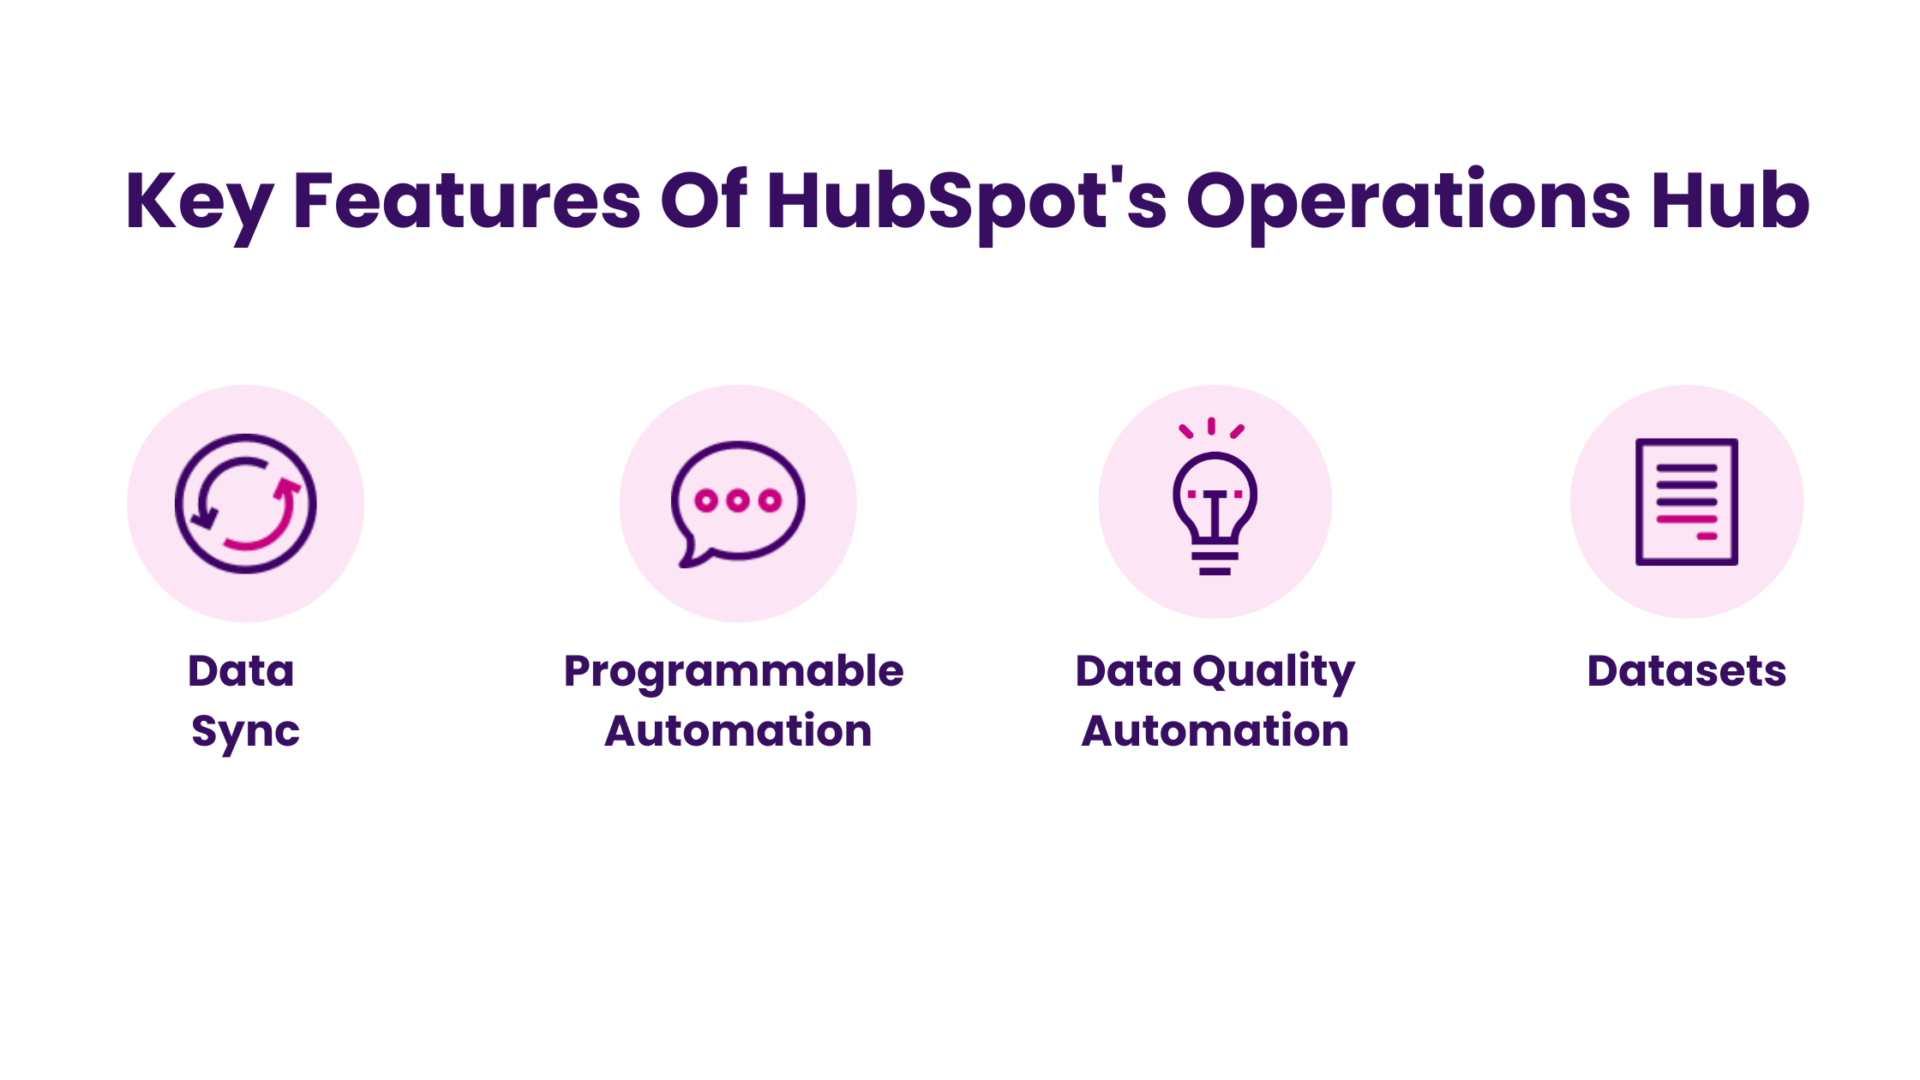 Key Features of HubSpot's Operations Hub